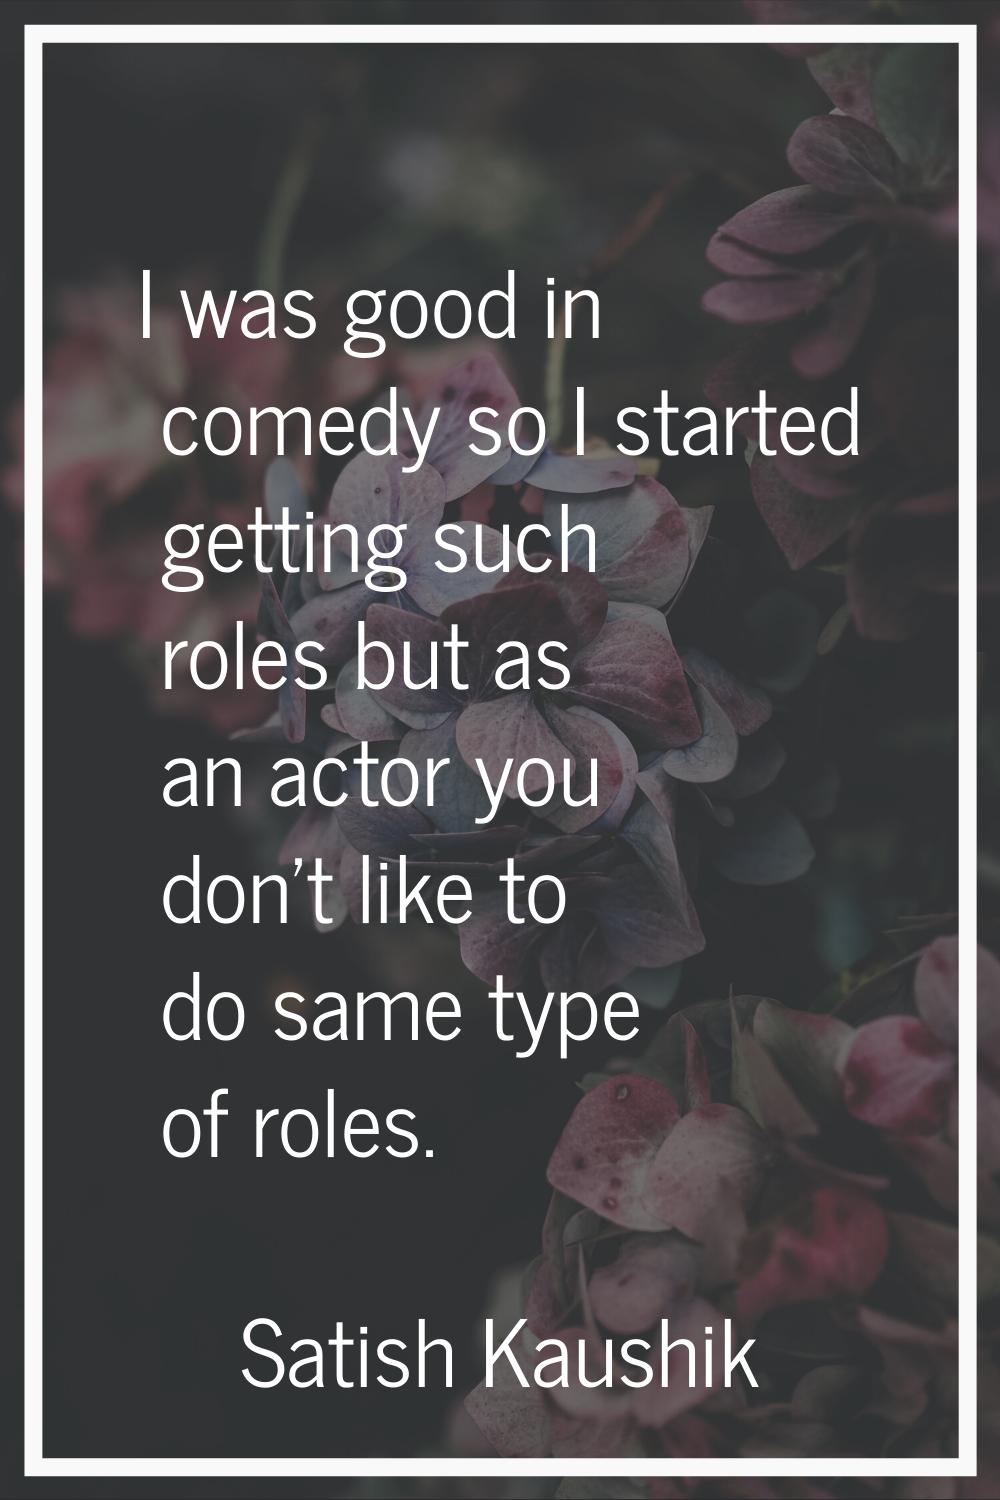 I was good in comedy so I started getting such roles but as an actor you don't like to do same type